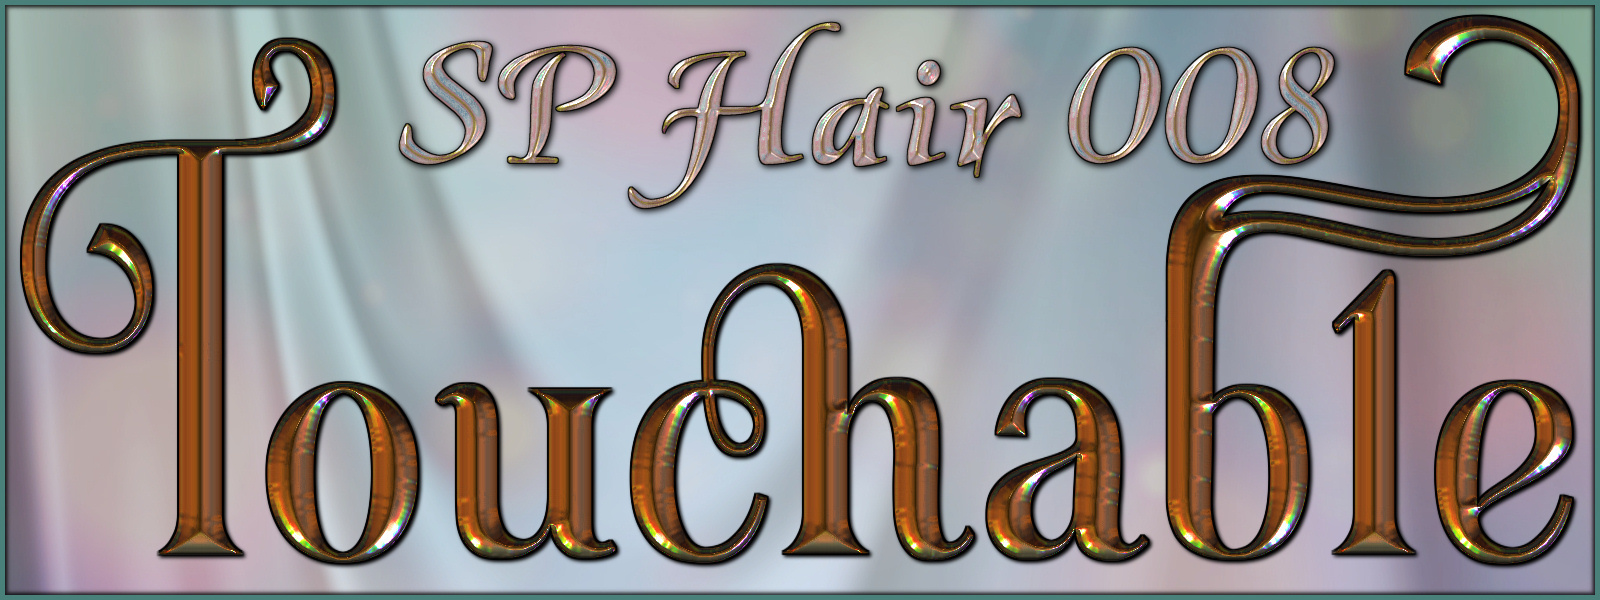 Touchable SP Hair 008 by: ~Wolfie~, 3D Models by Daz 3D